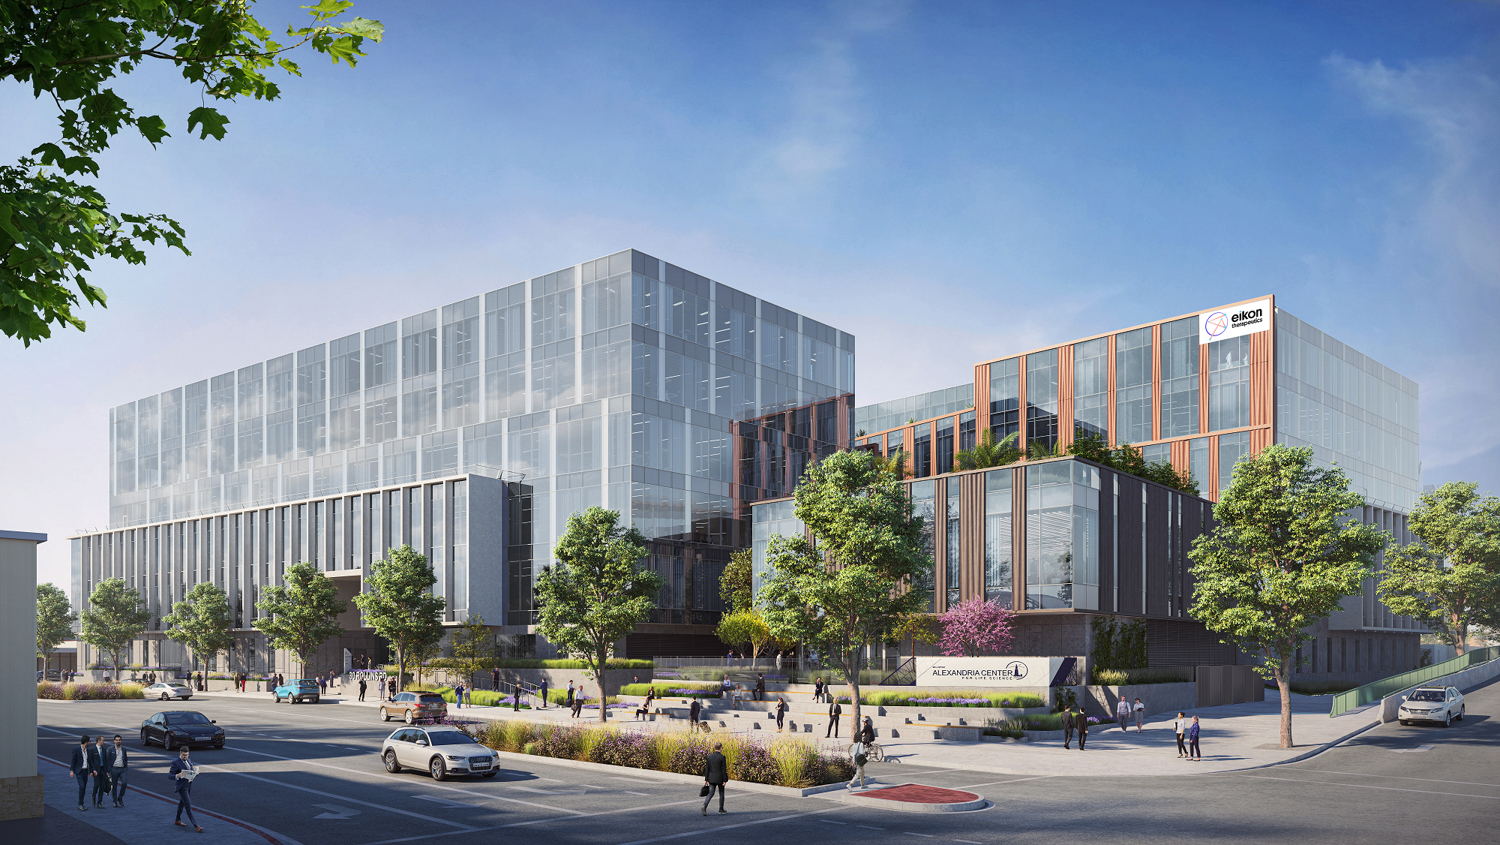 Millbrae Campus with Eikon signage on display, rendering by WRNS Studio